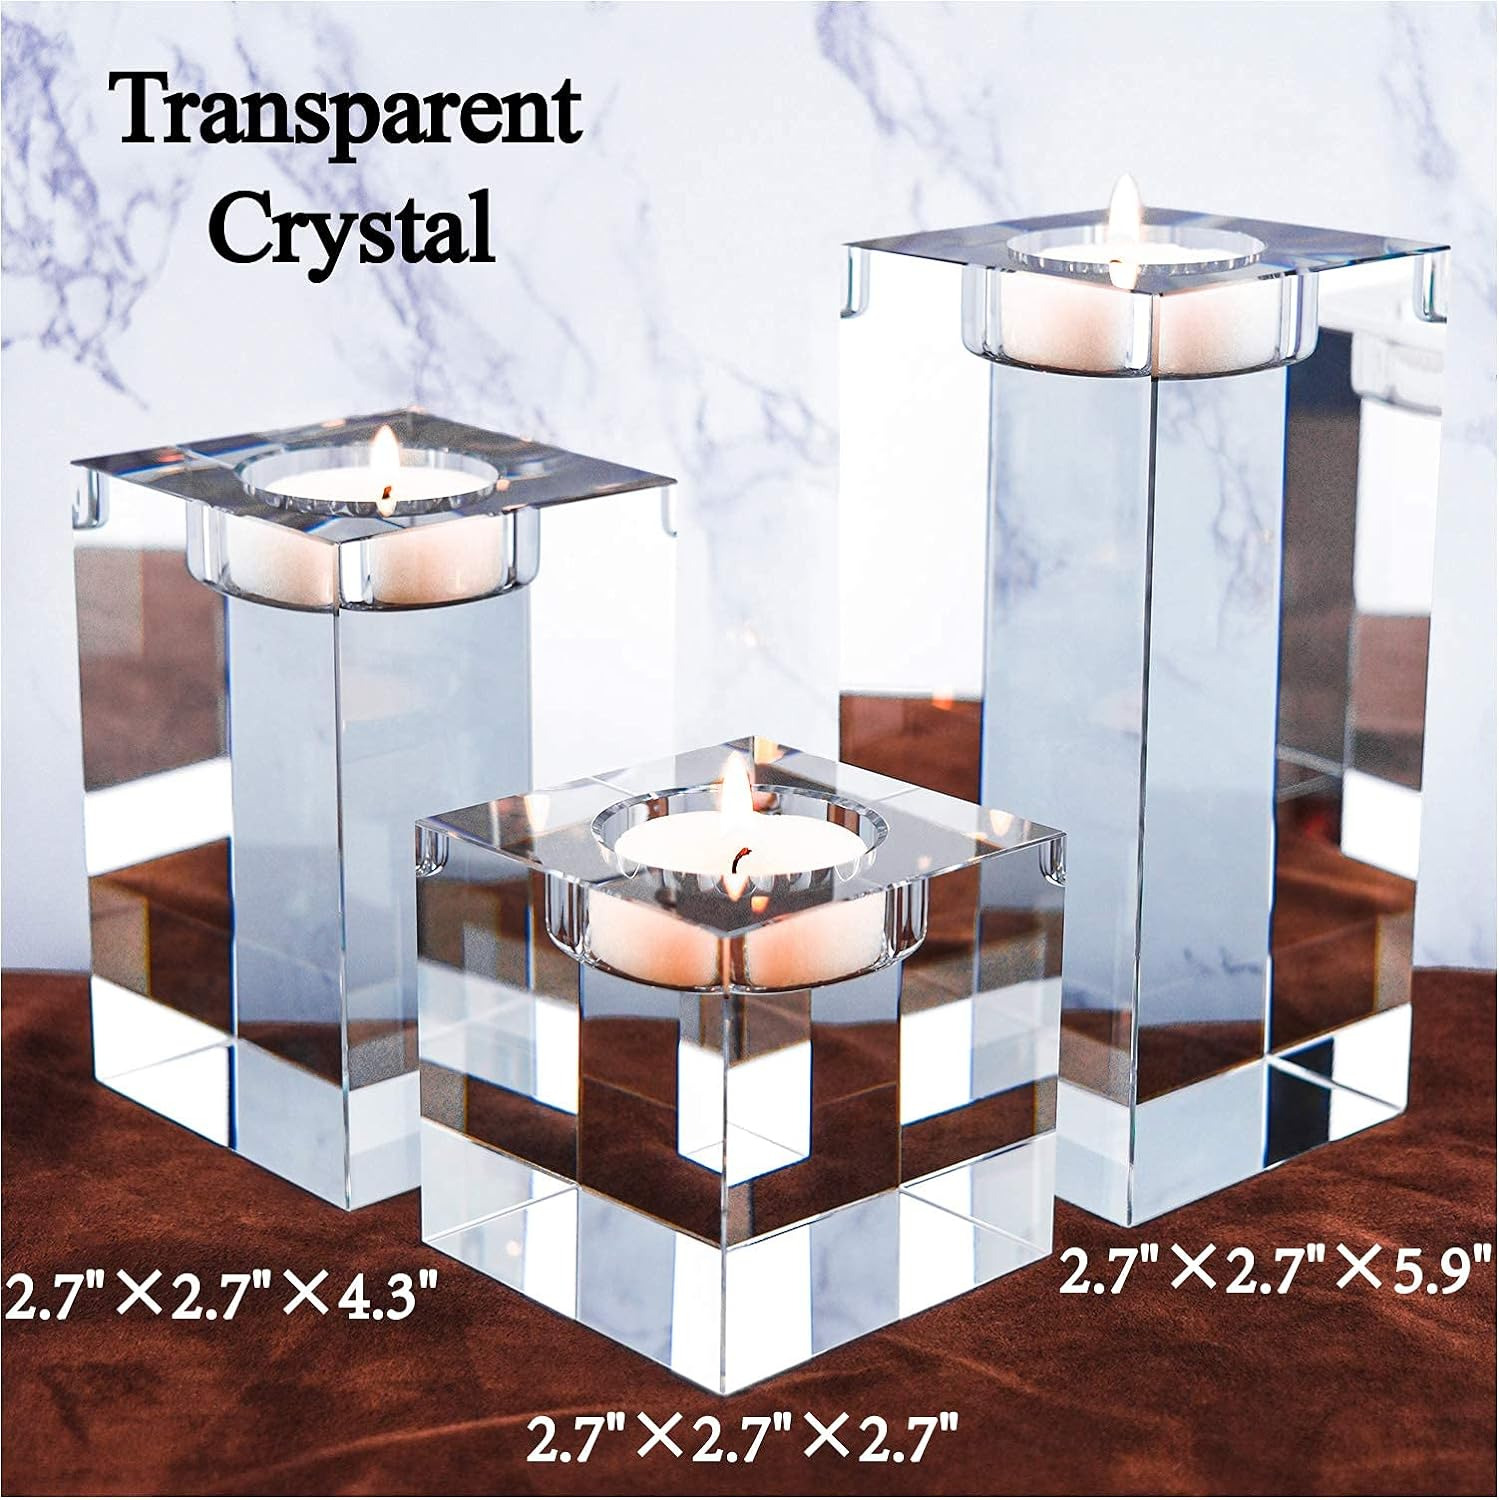 Large Crystal Candle Holders Set of 3, 2.7/4.3/5.9 Inches, Prepackaged Huge Big 